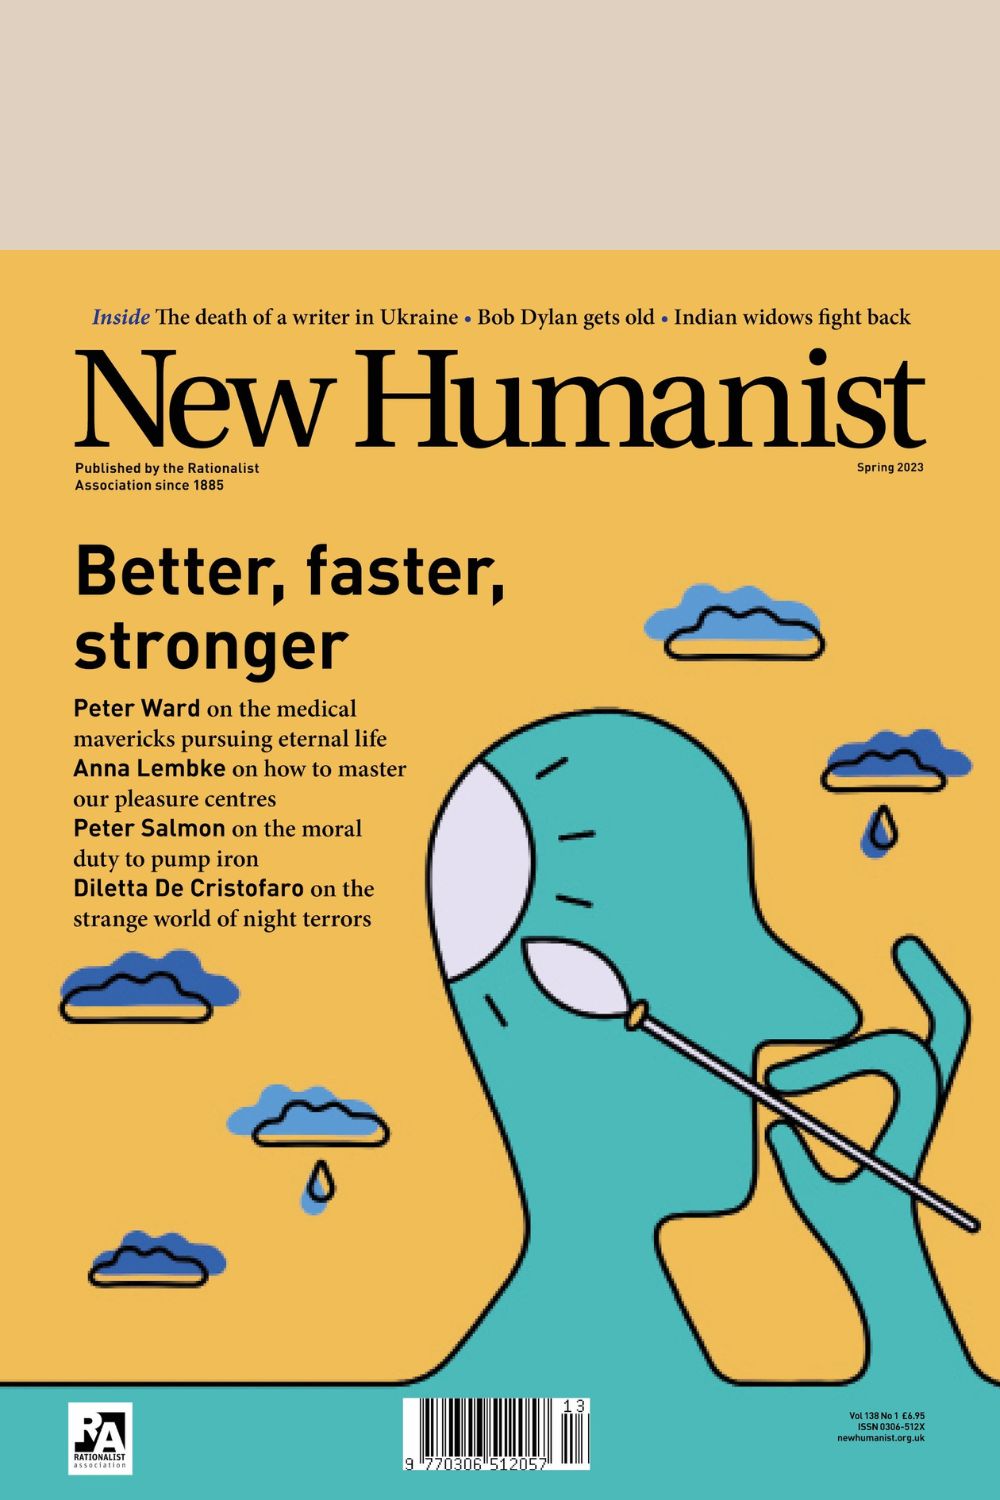 New Humanist Spring 2023